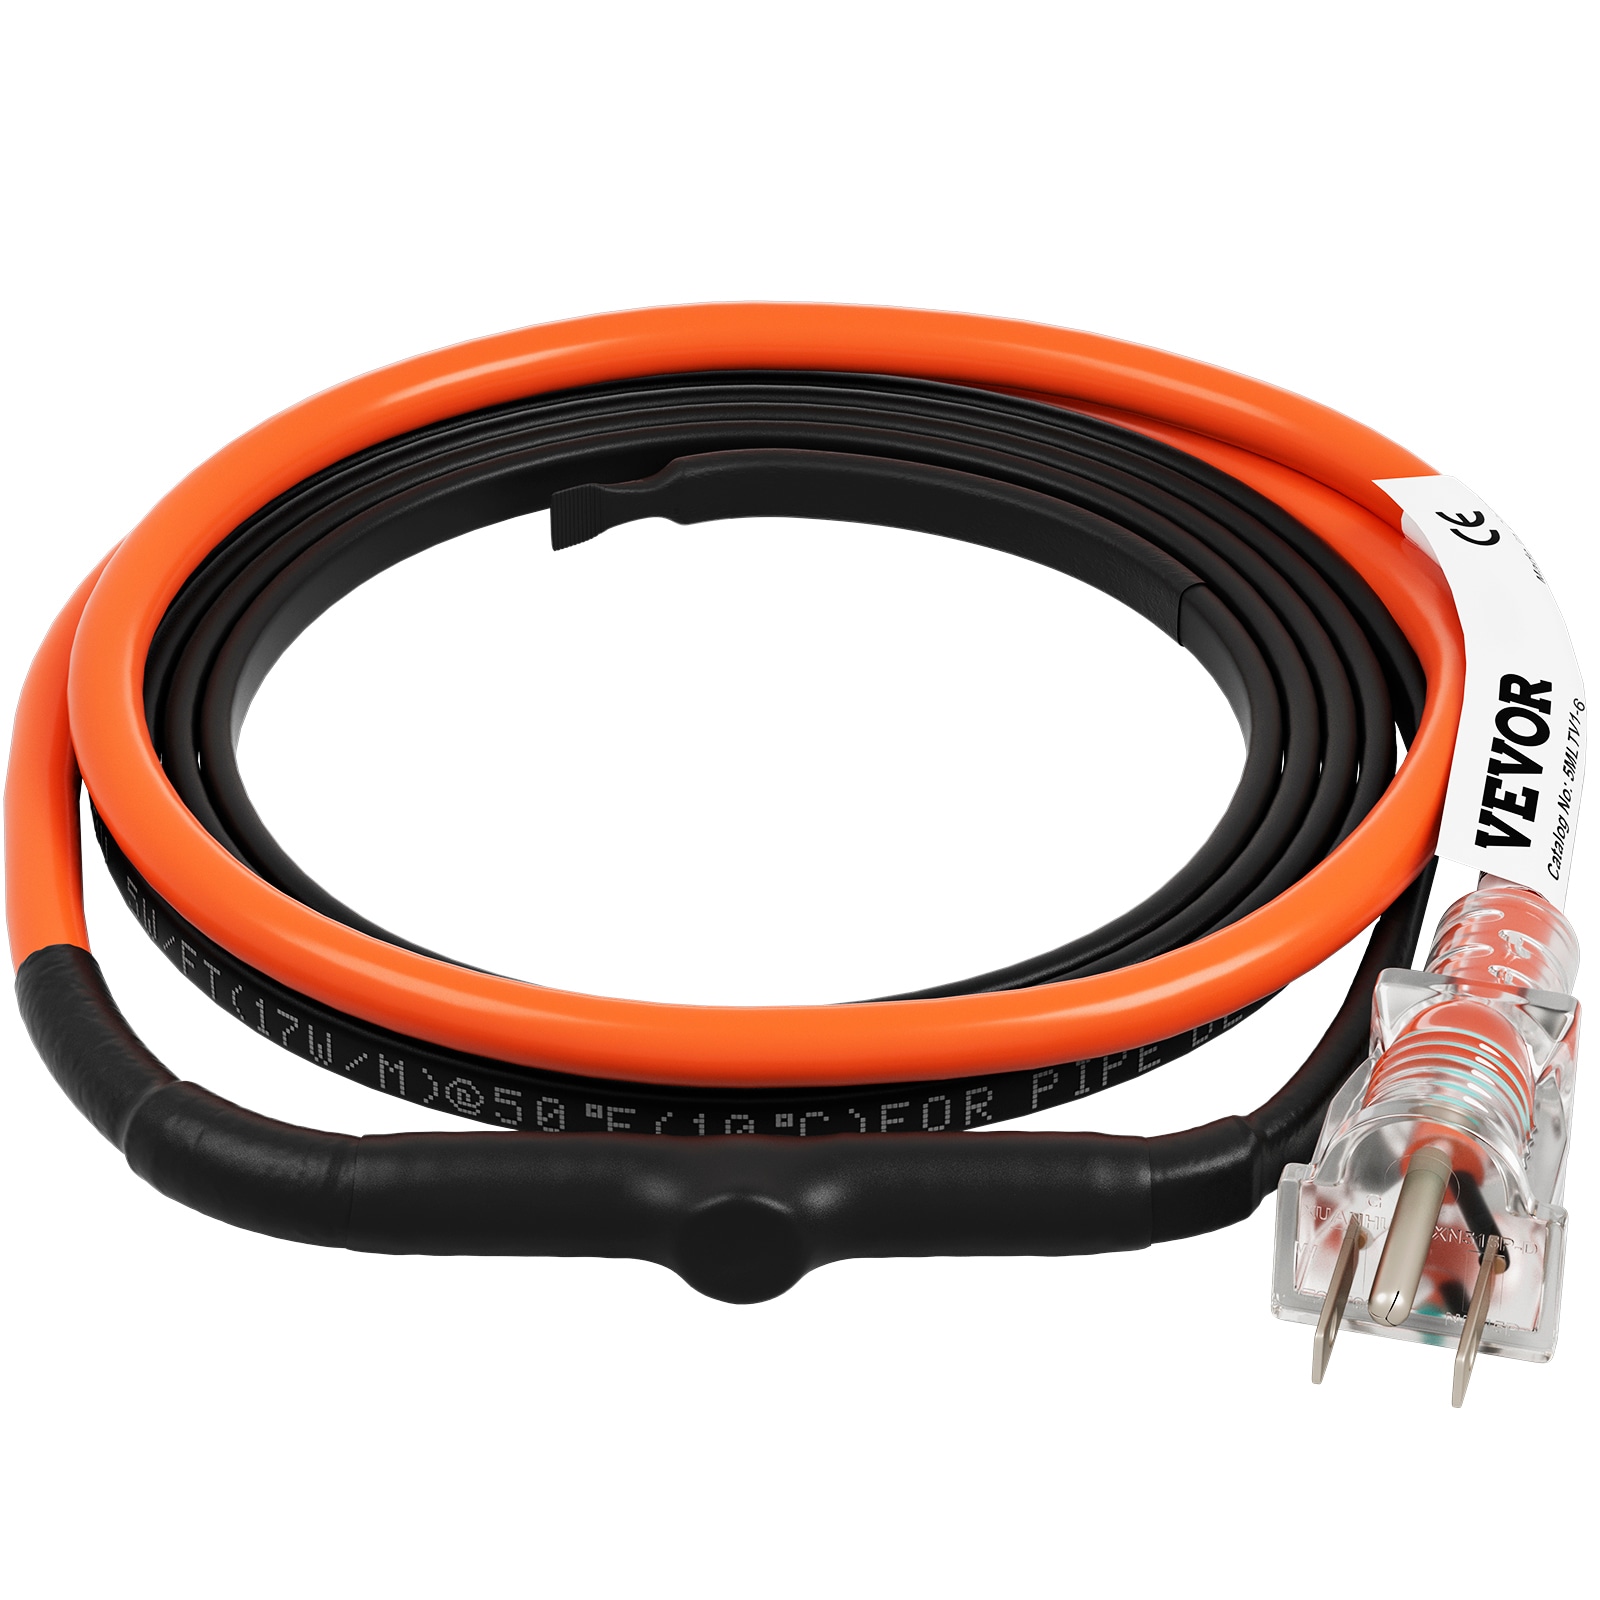 Self-Regulating Pipe Heating Cable, 100-feet 5W/ft Heat Tape for Pipes,  Roof Snow Melting